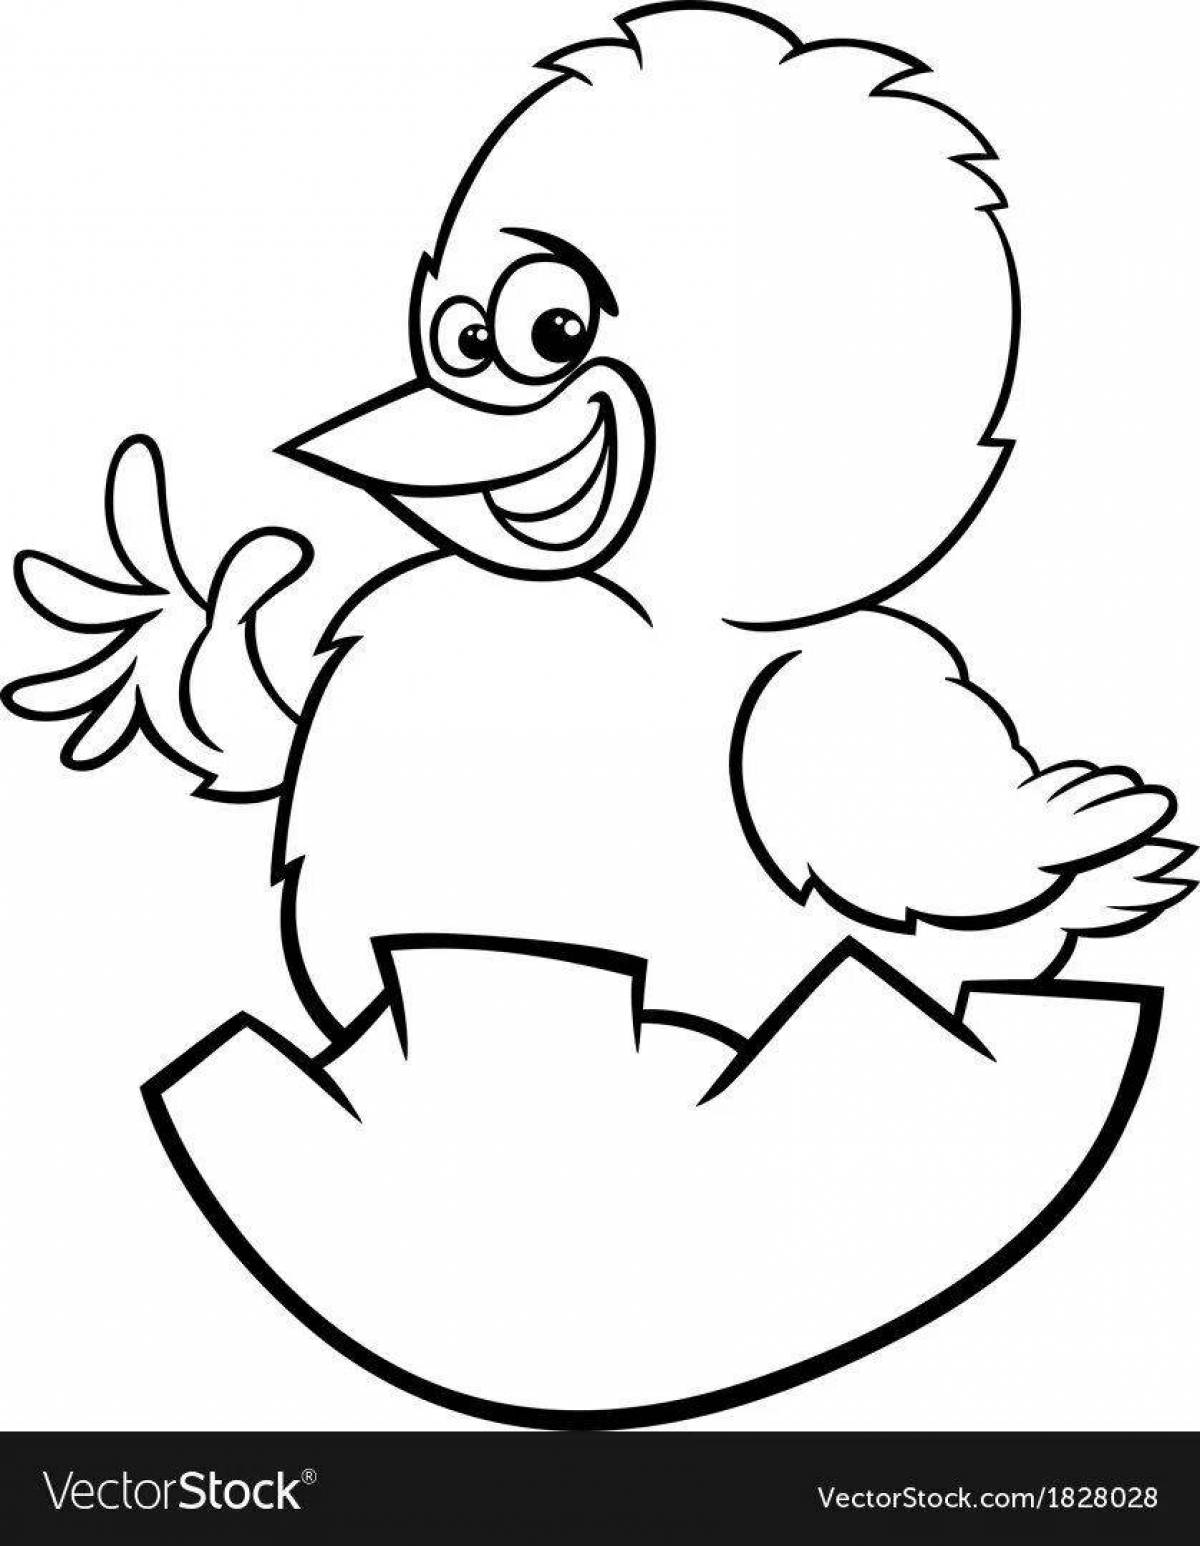 Adorable chicken in shell coloring page